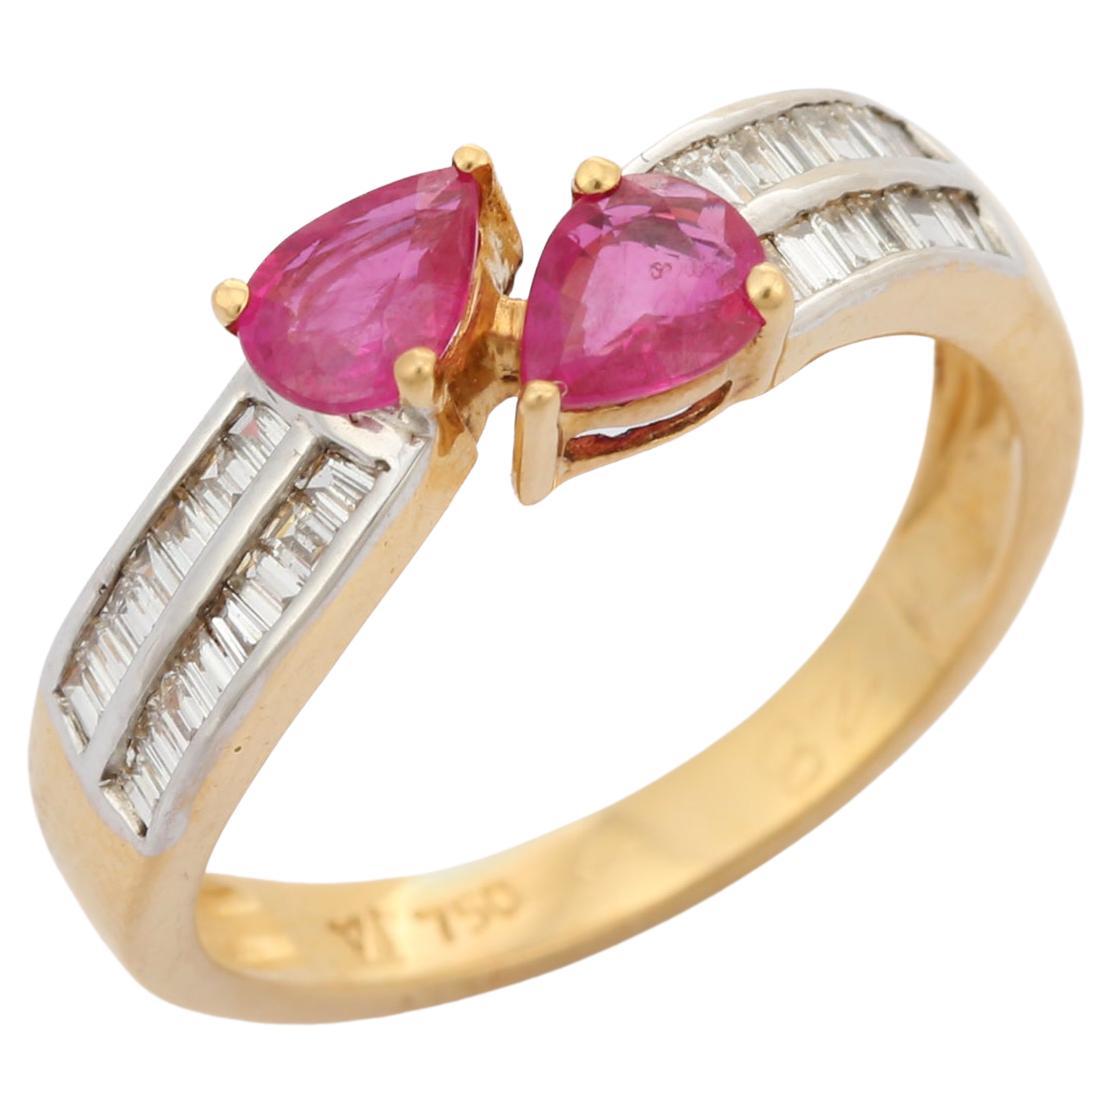 Handcrafted 18K Solid Yellow Gold Pear Cut Ruby and Diamond Wrap Around Ring